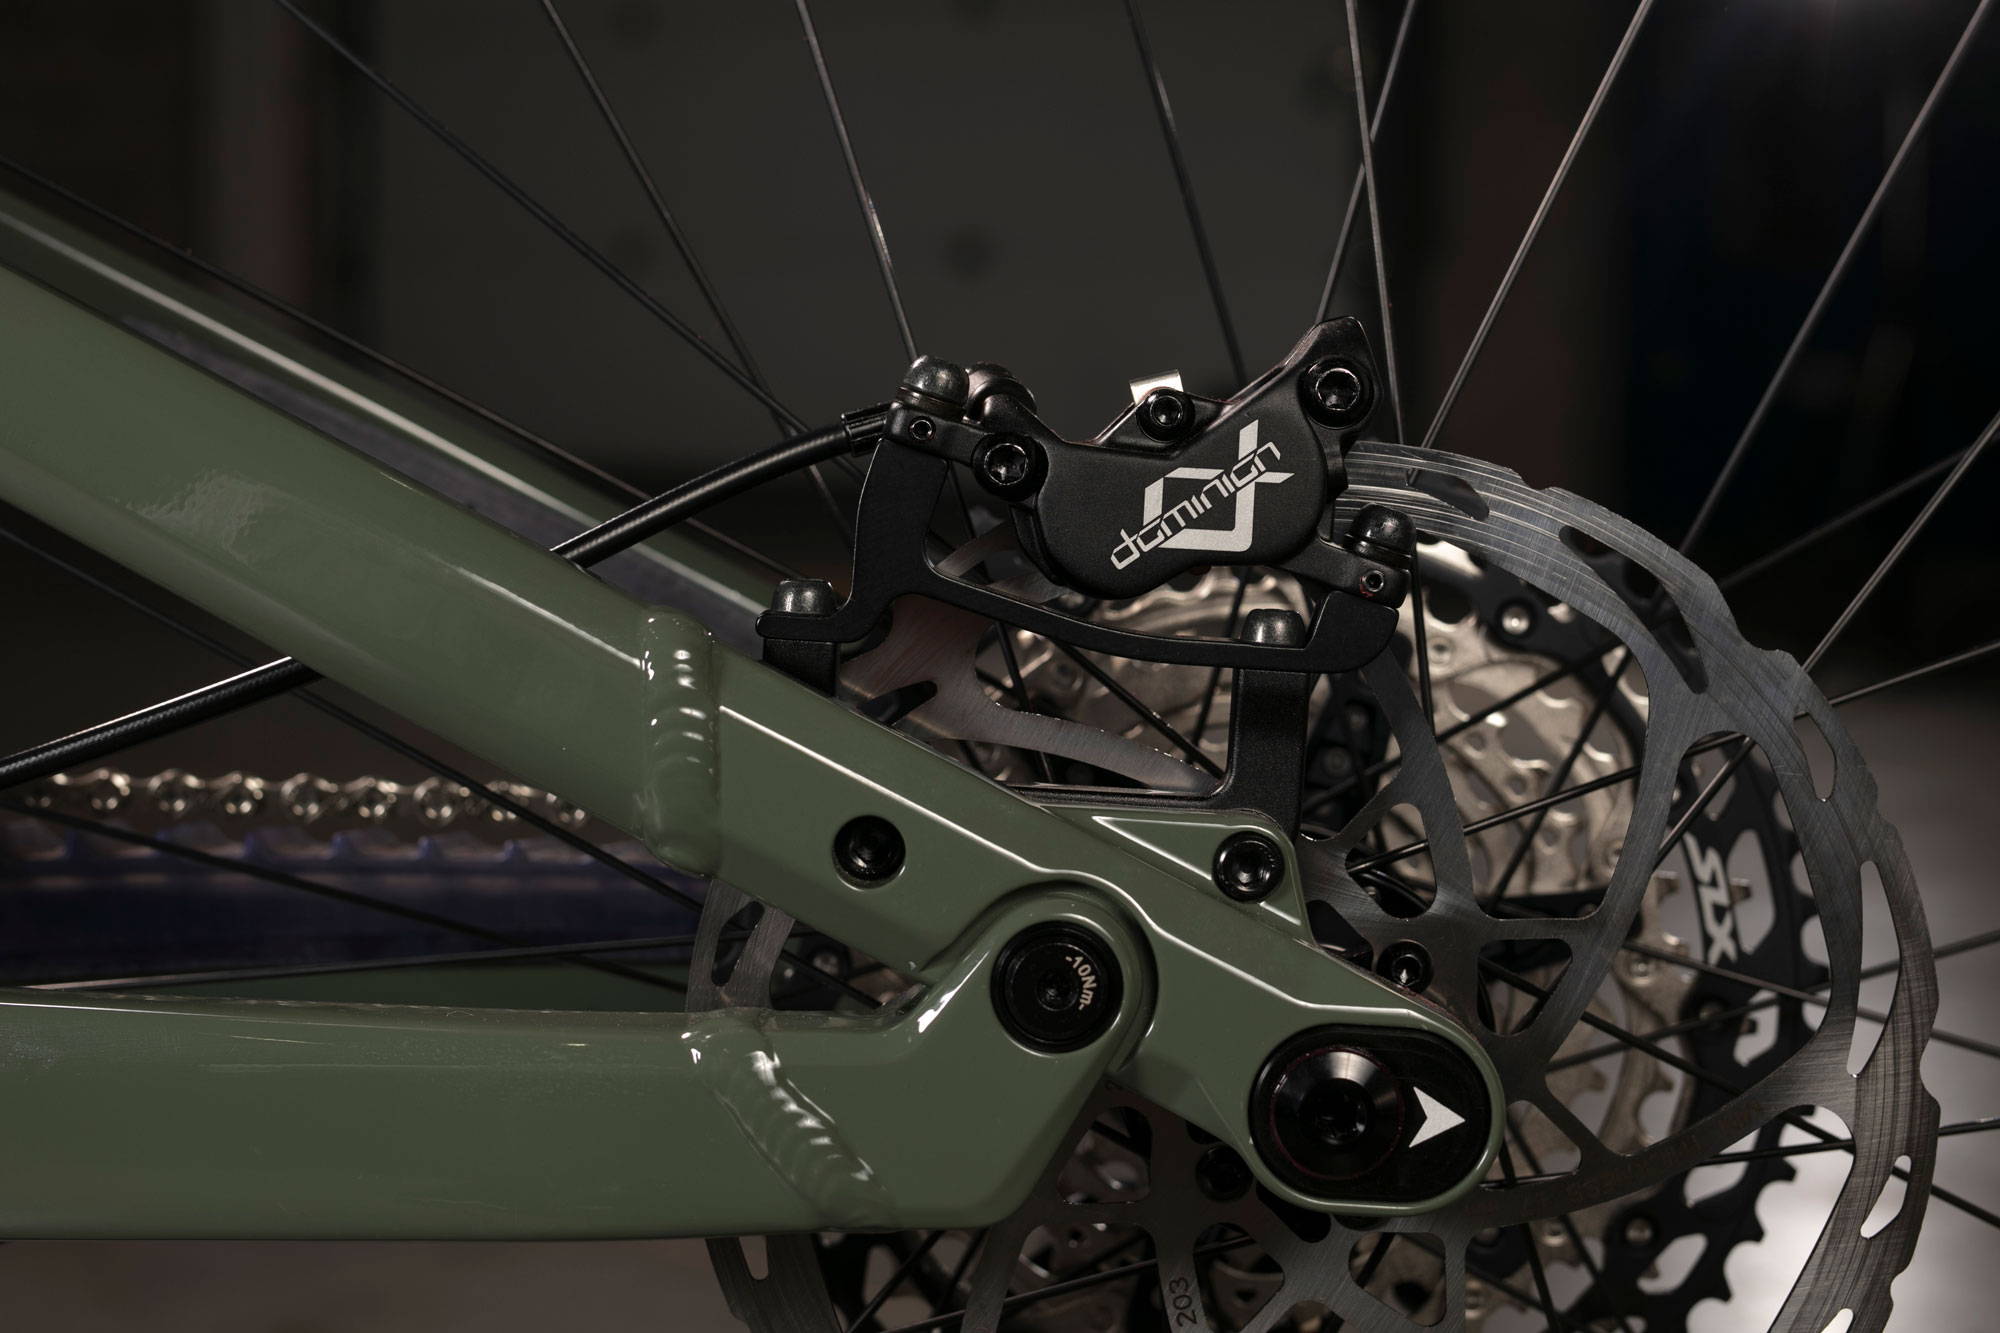 Hayes Dominion Disc brakes on Privateer 161 frame